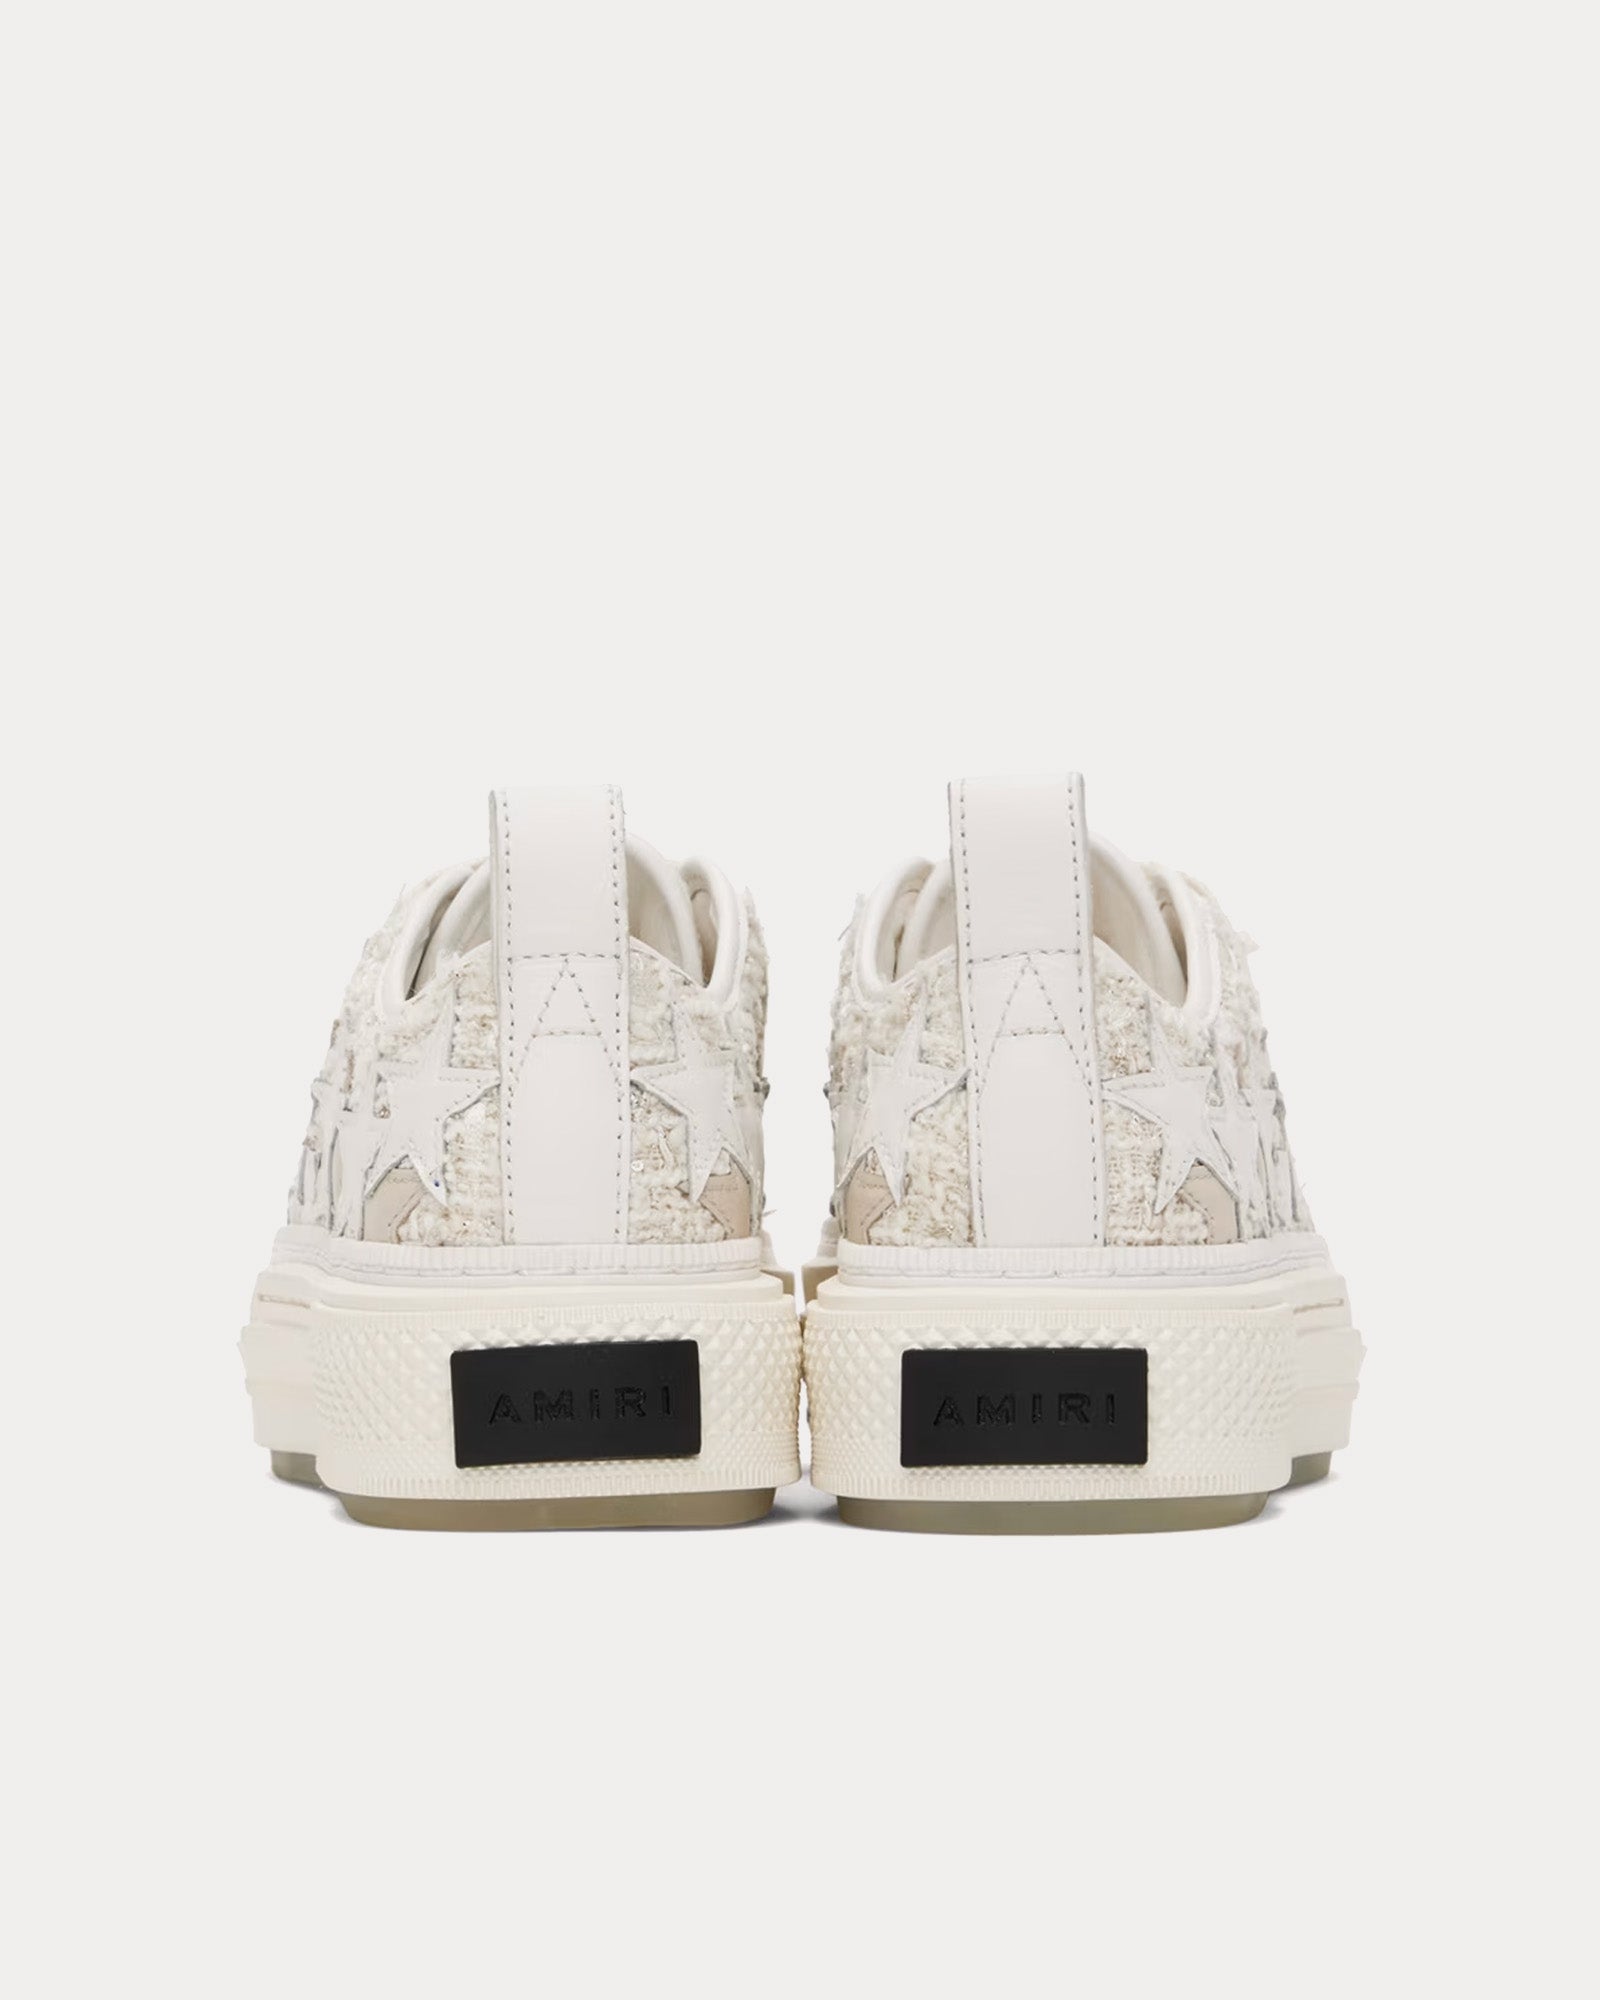 AMIRI - Stars Court Boucle Alabaster Low Top Sneakers